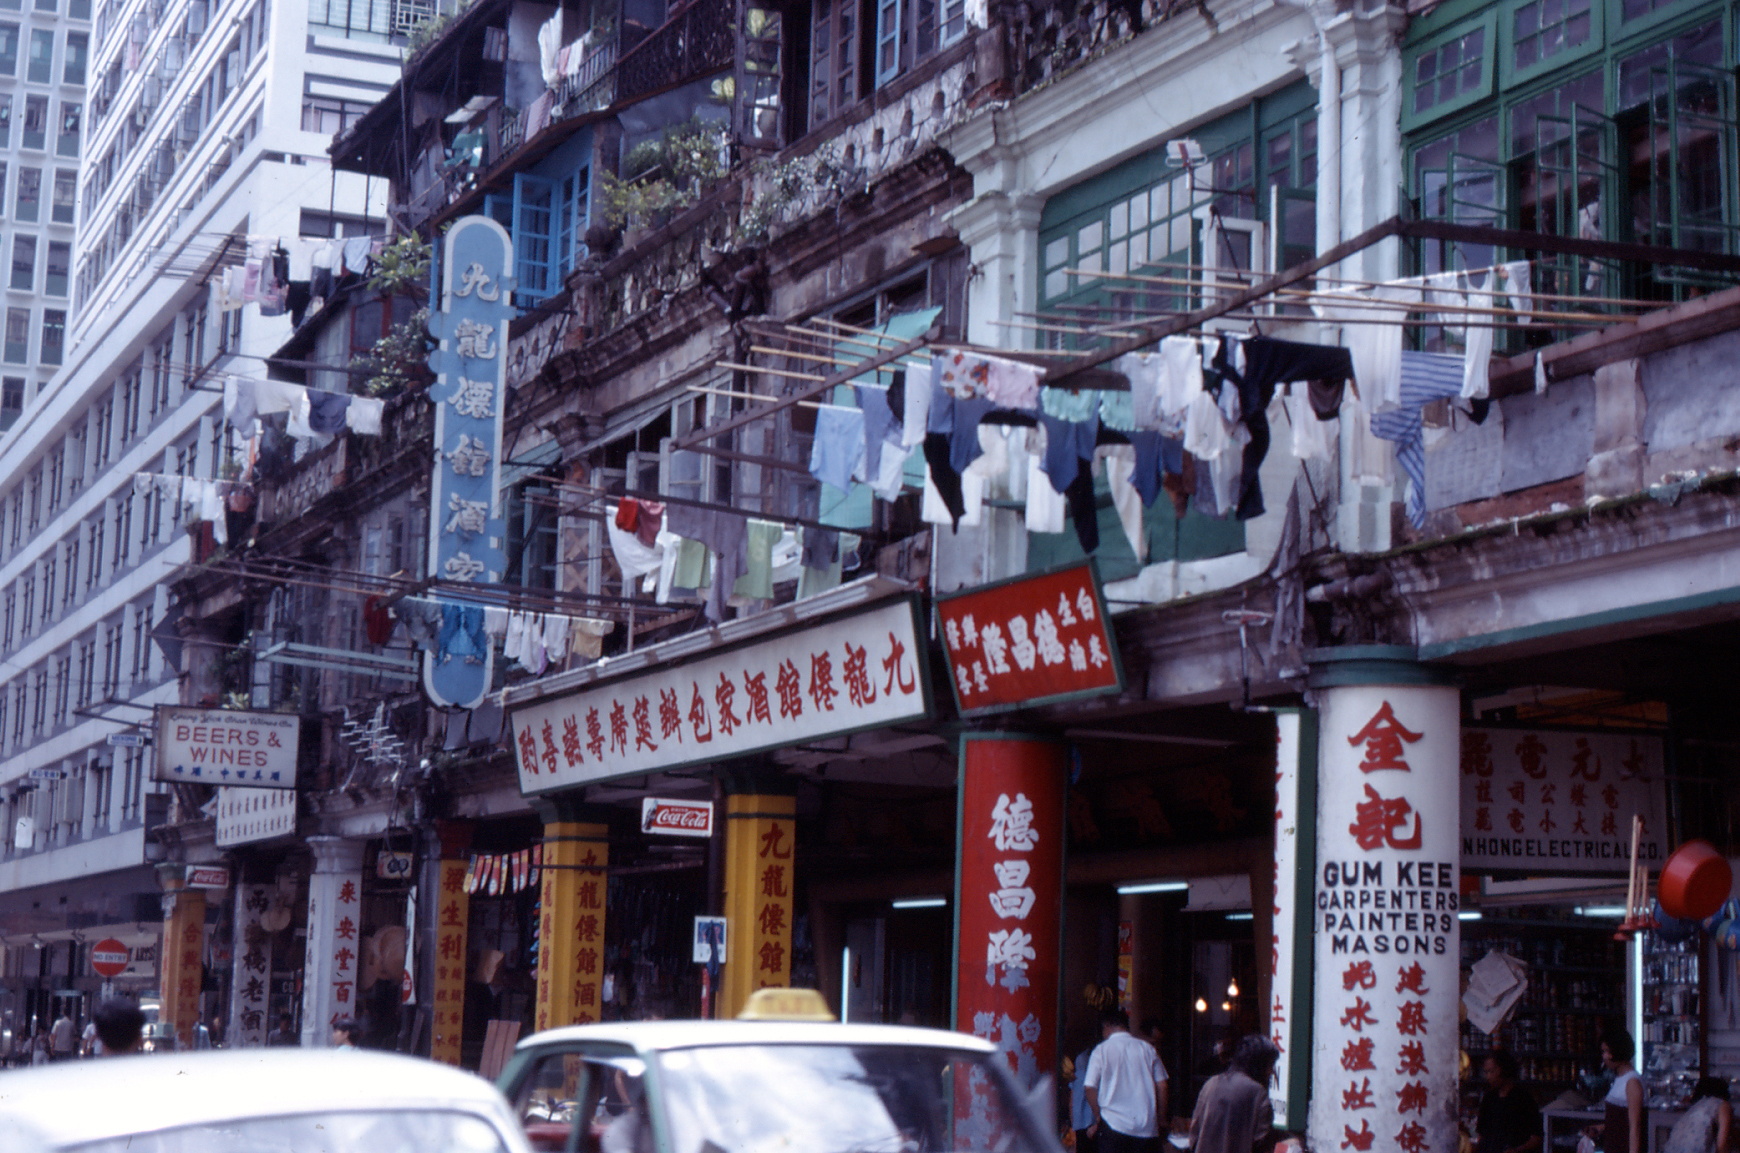 Laundry day in Hong Kong